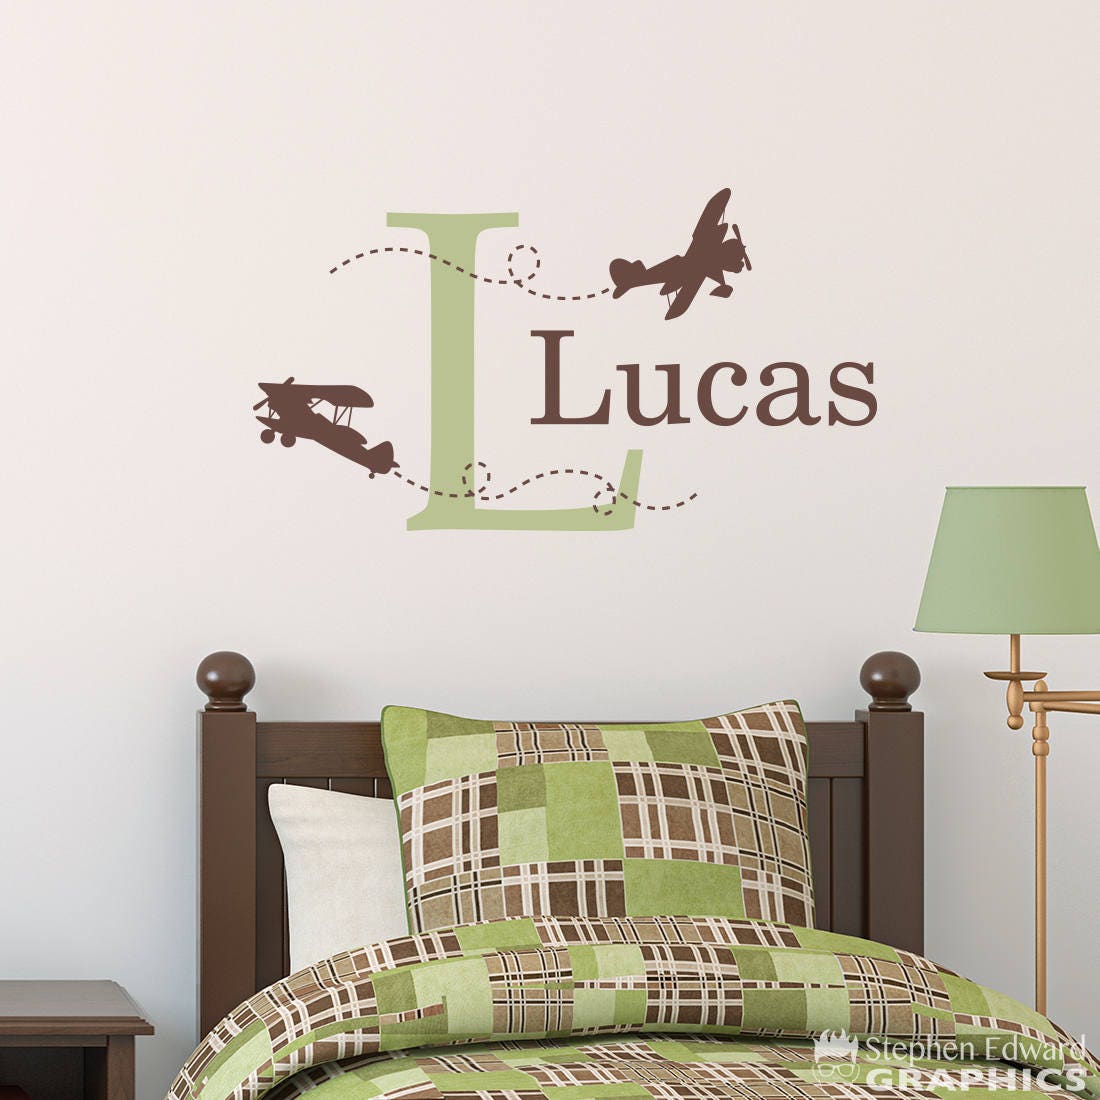 Biplane Wall Decal - Airplane Decal with Initial and Name - Personalized Boy Decal - Medium